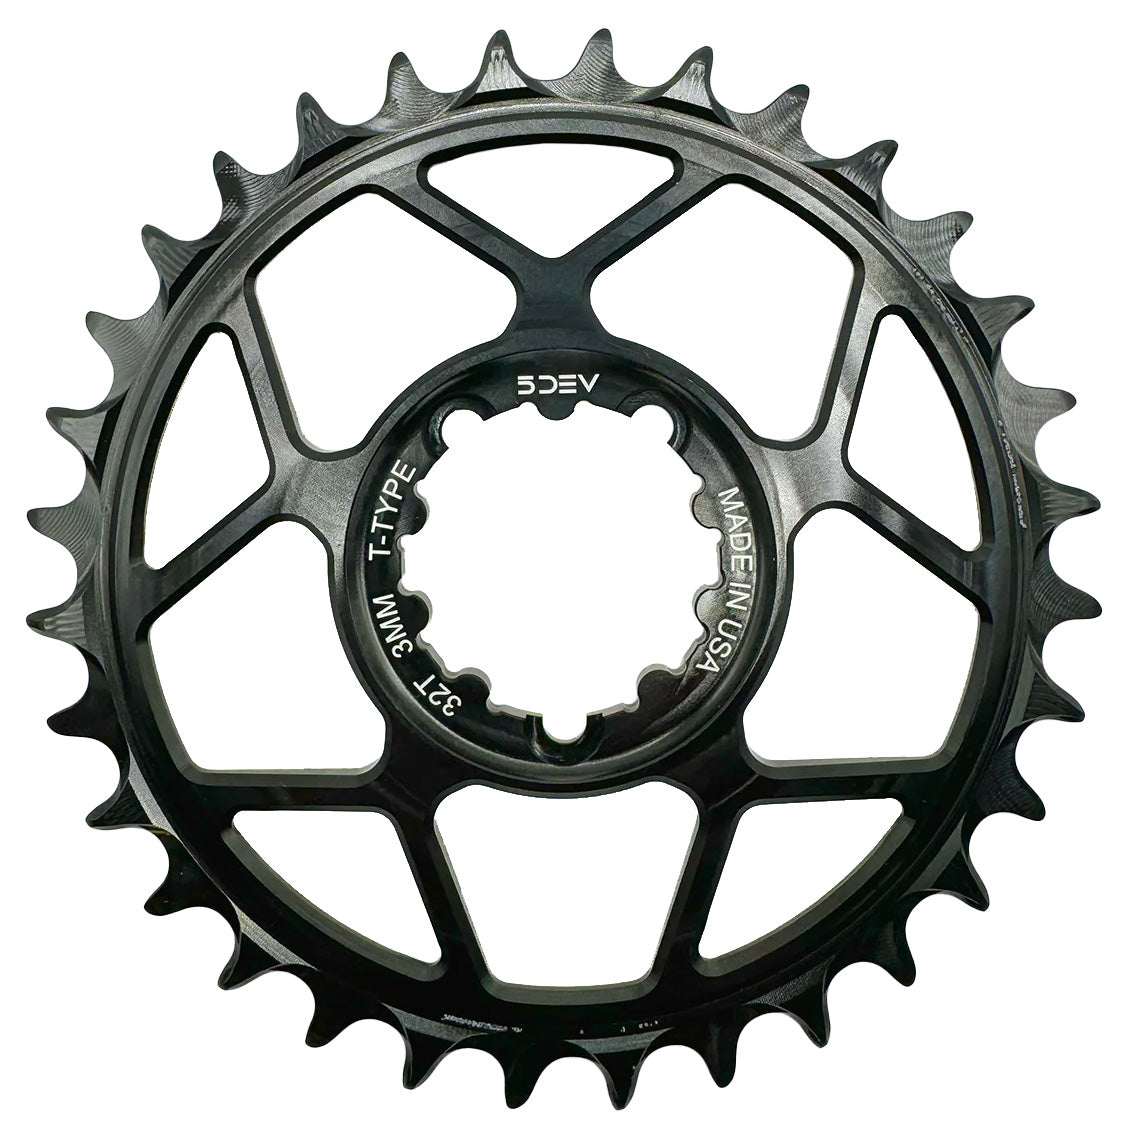 5Dev T-Type 3-Bolt Chainring 3mm Offset 32T - Clear/Silve